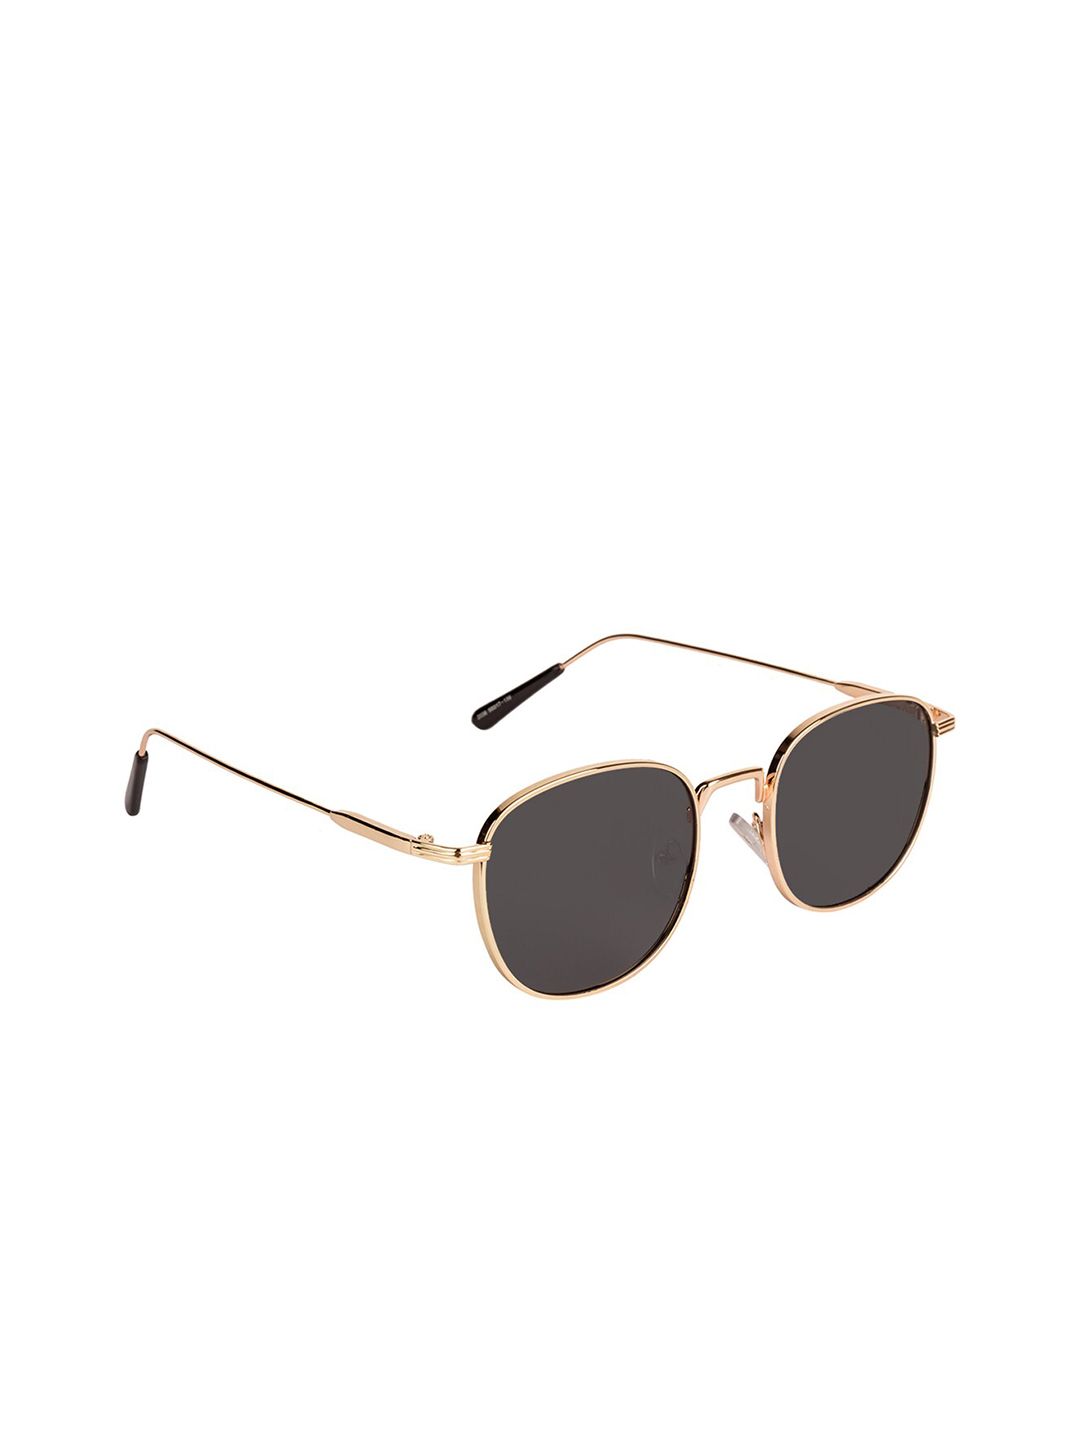 Voyage Black Lens & Gold-Toned Round Sunglasses with UV Protected Lens Price in India